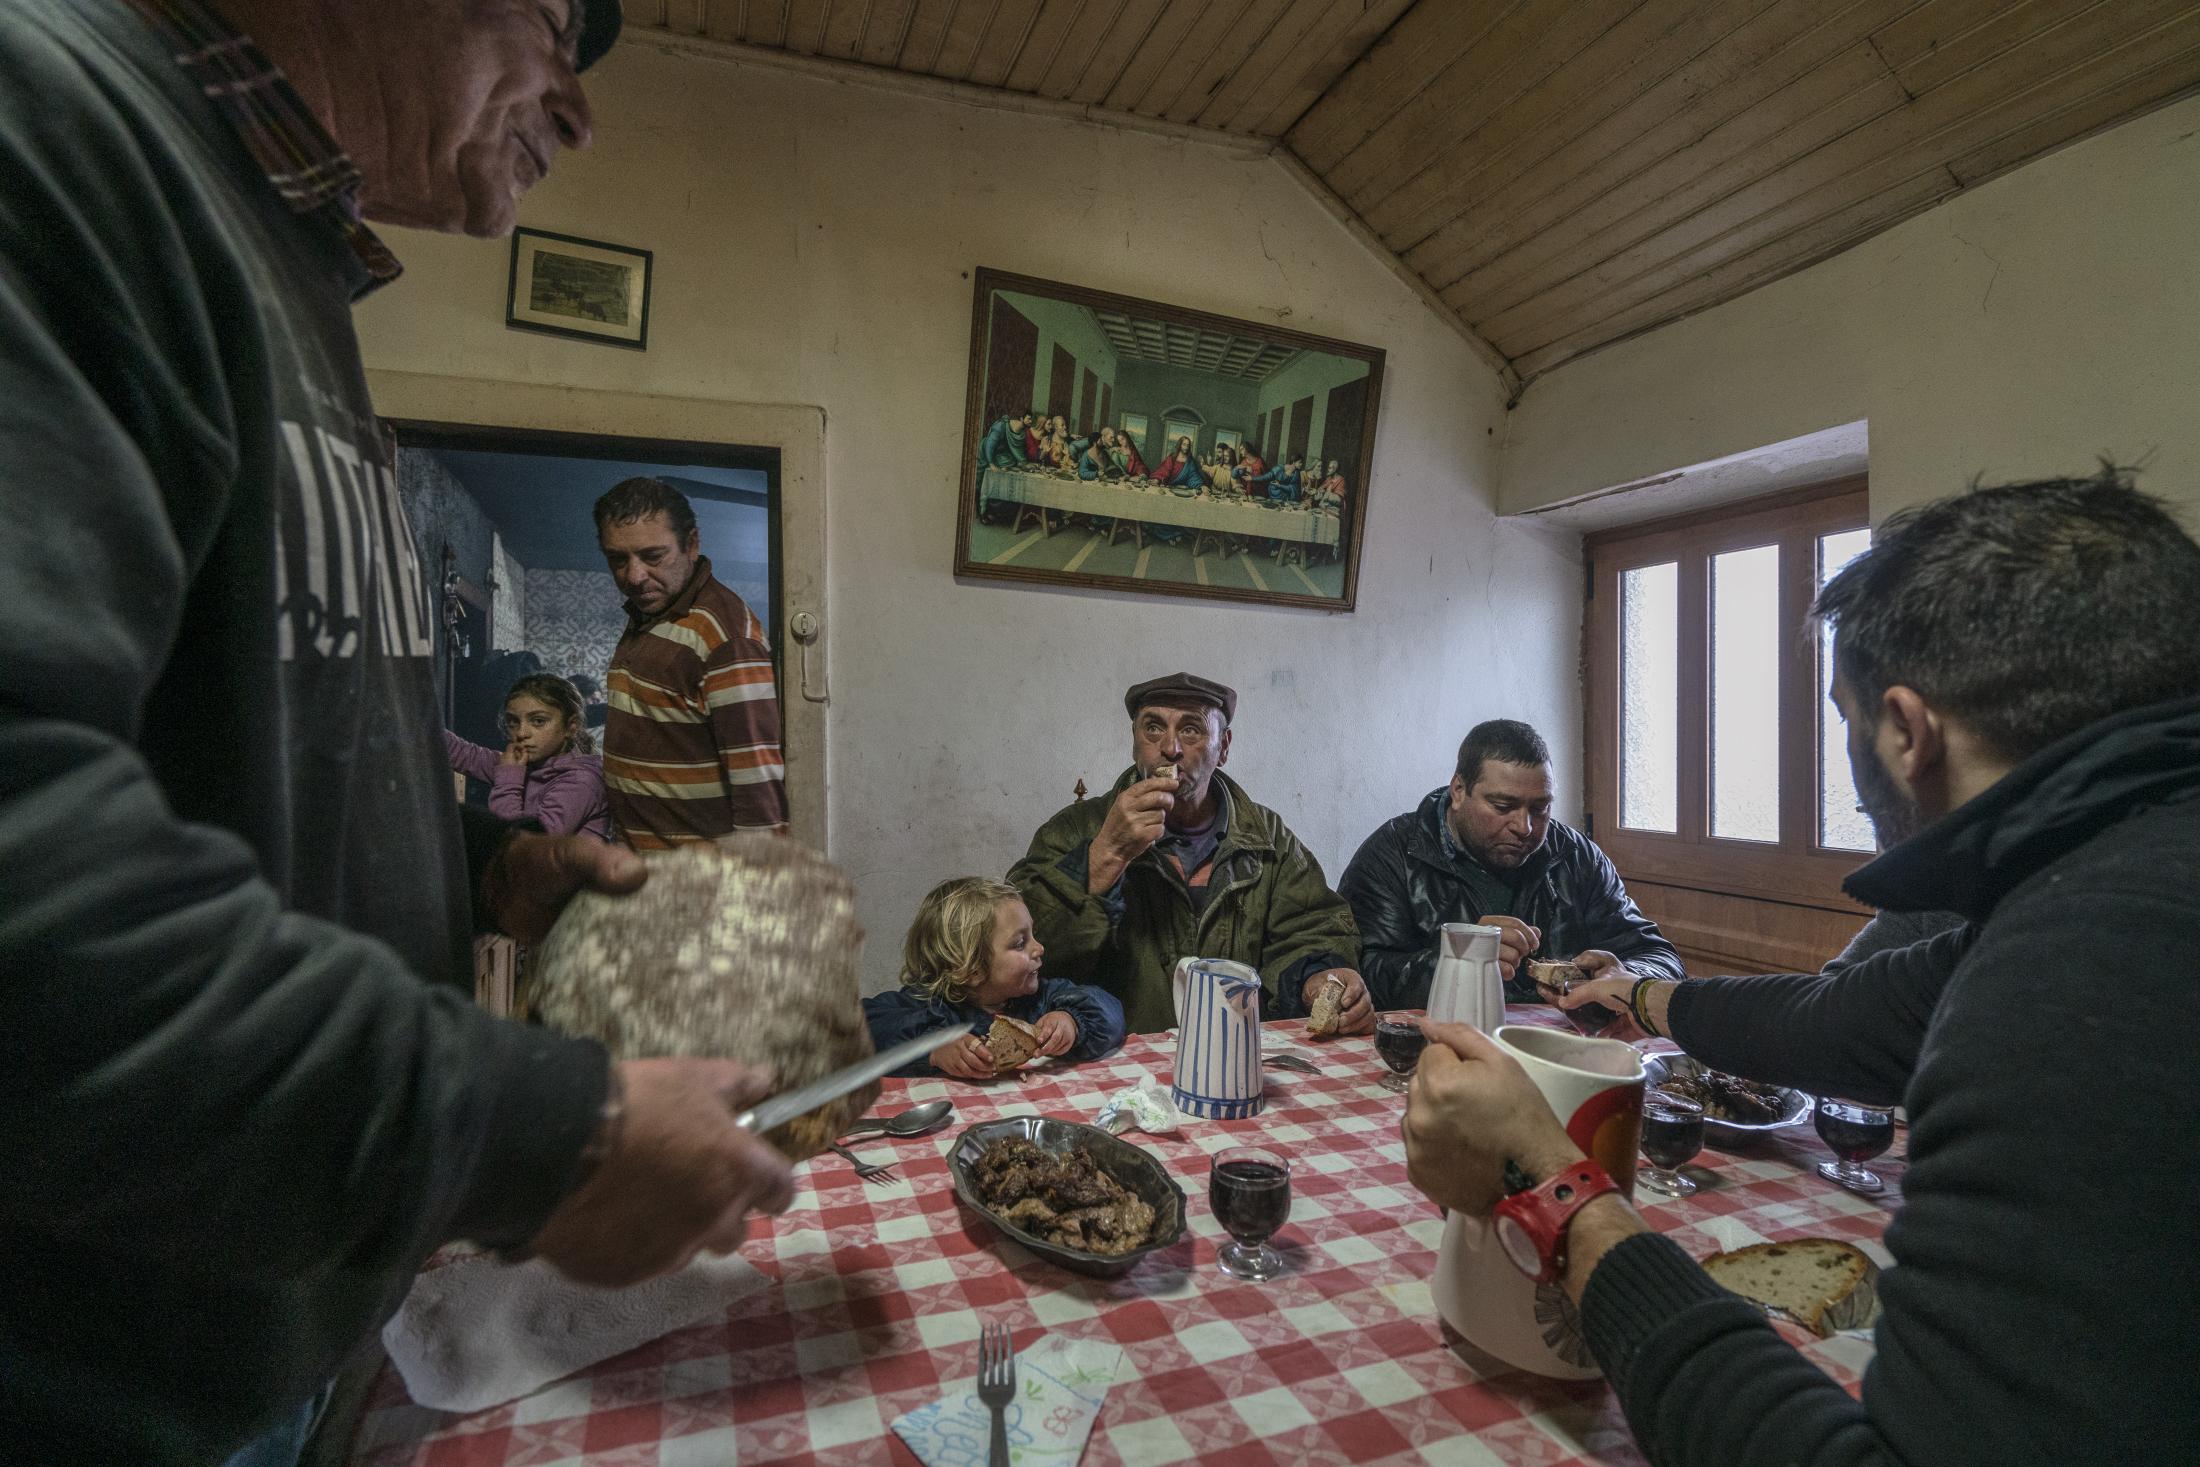 Barroso: An Ancient Farming Culture in Northern Portugal Becomes a World Heritage - Elias Coelho (left) serves homemade bread to his family...